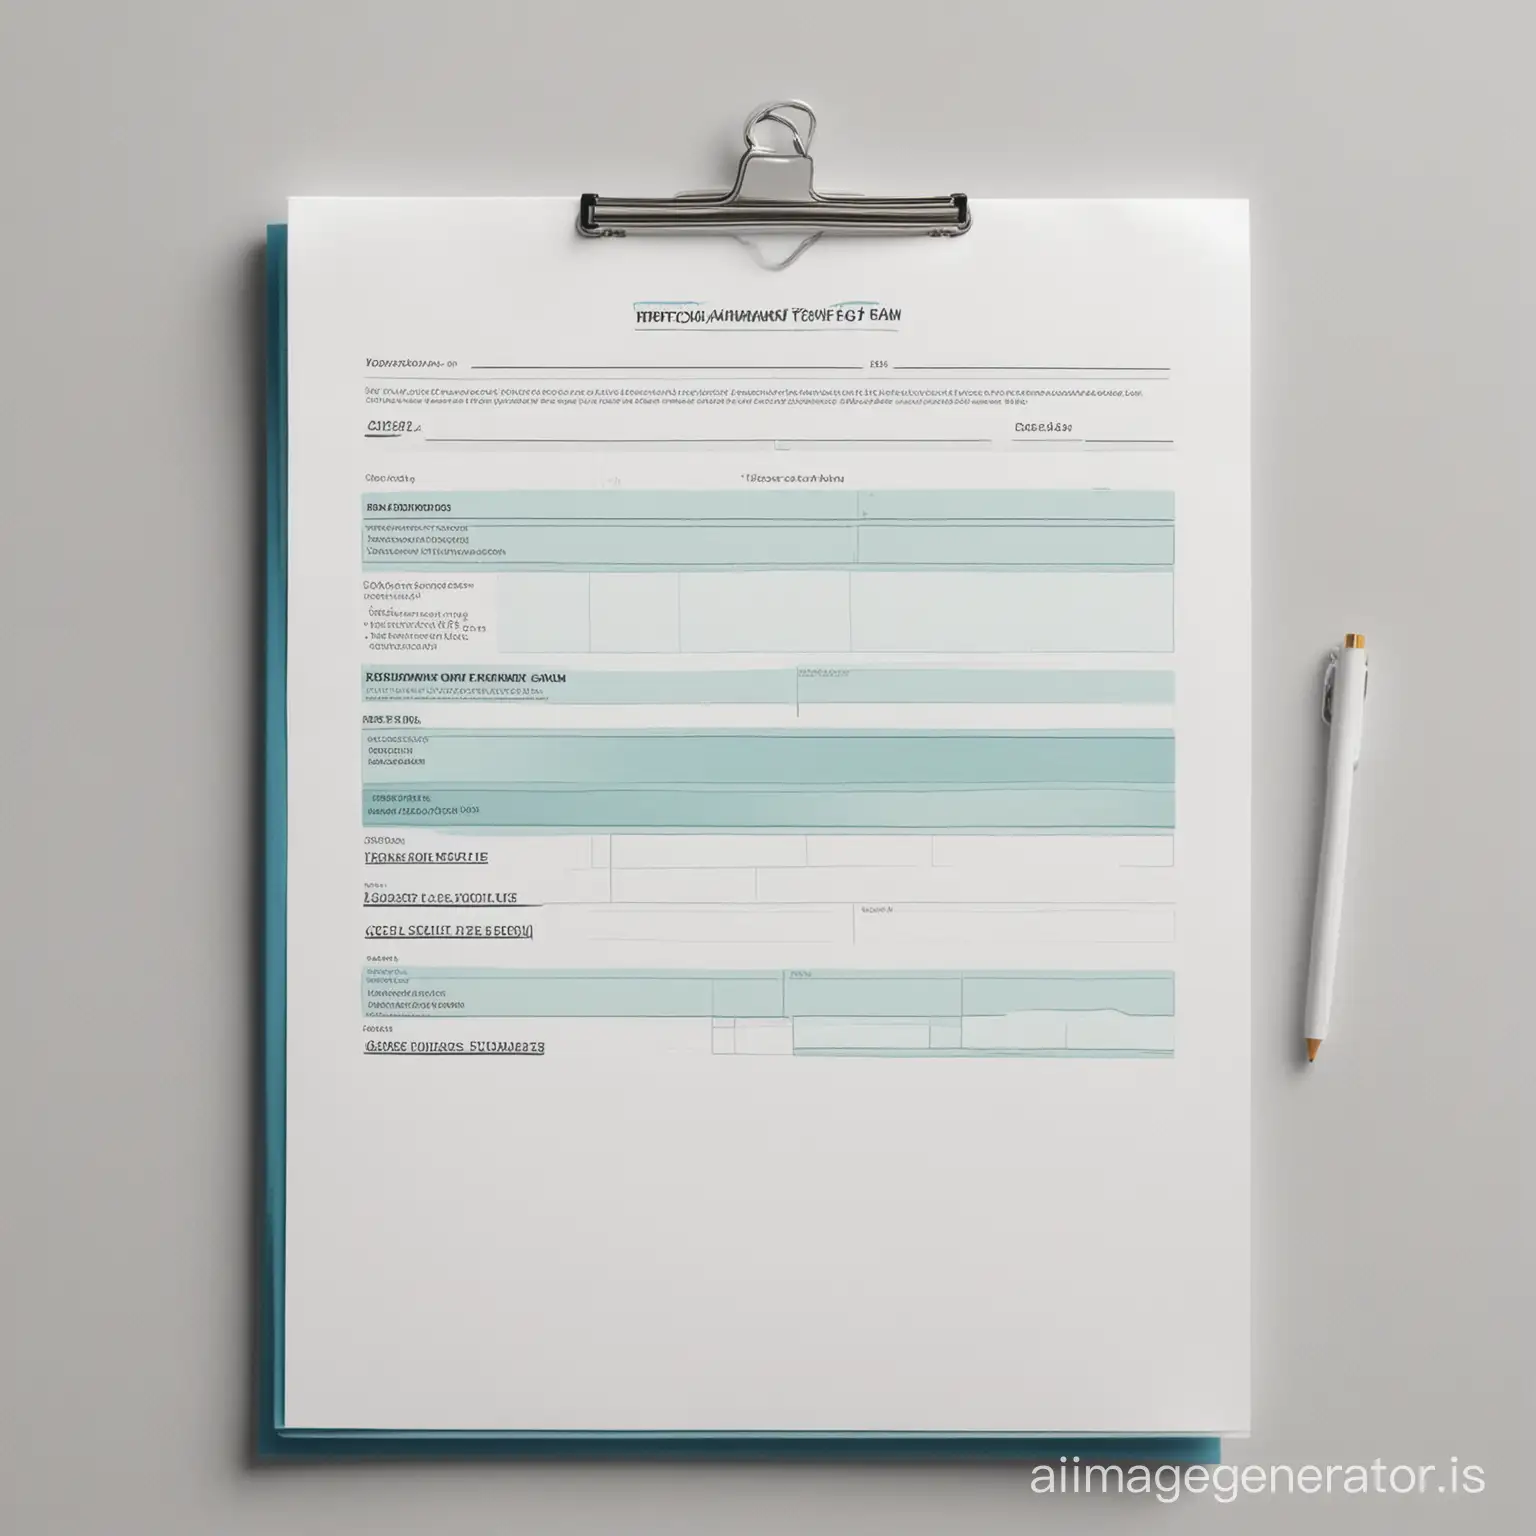 provide an image of a performance improvement plan template or form